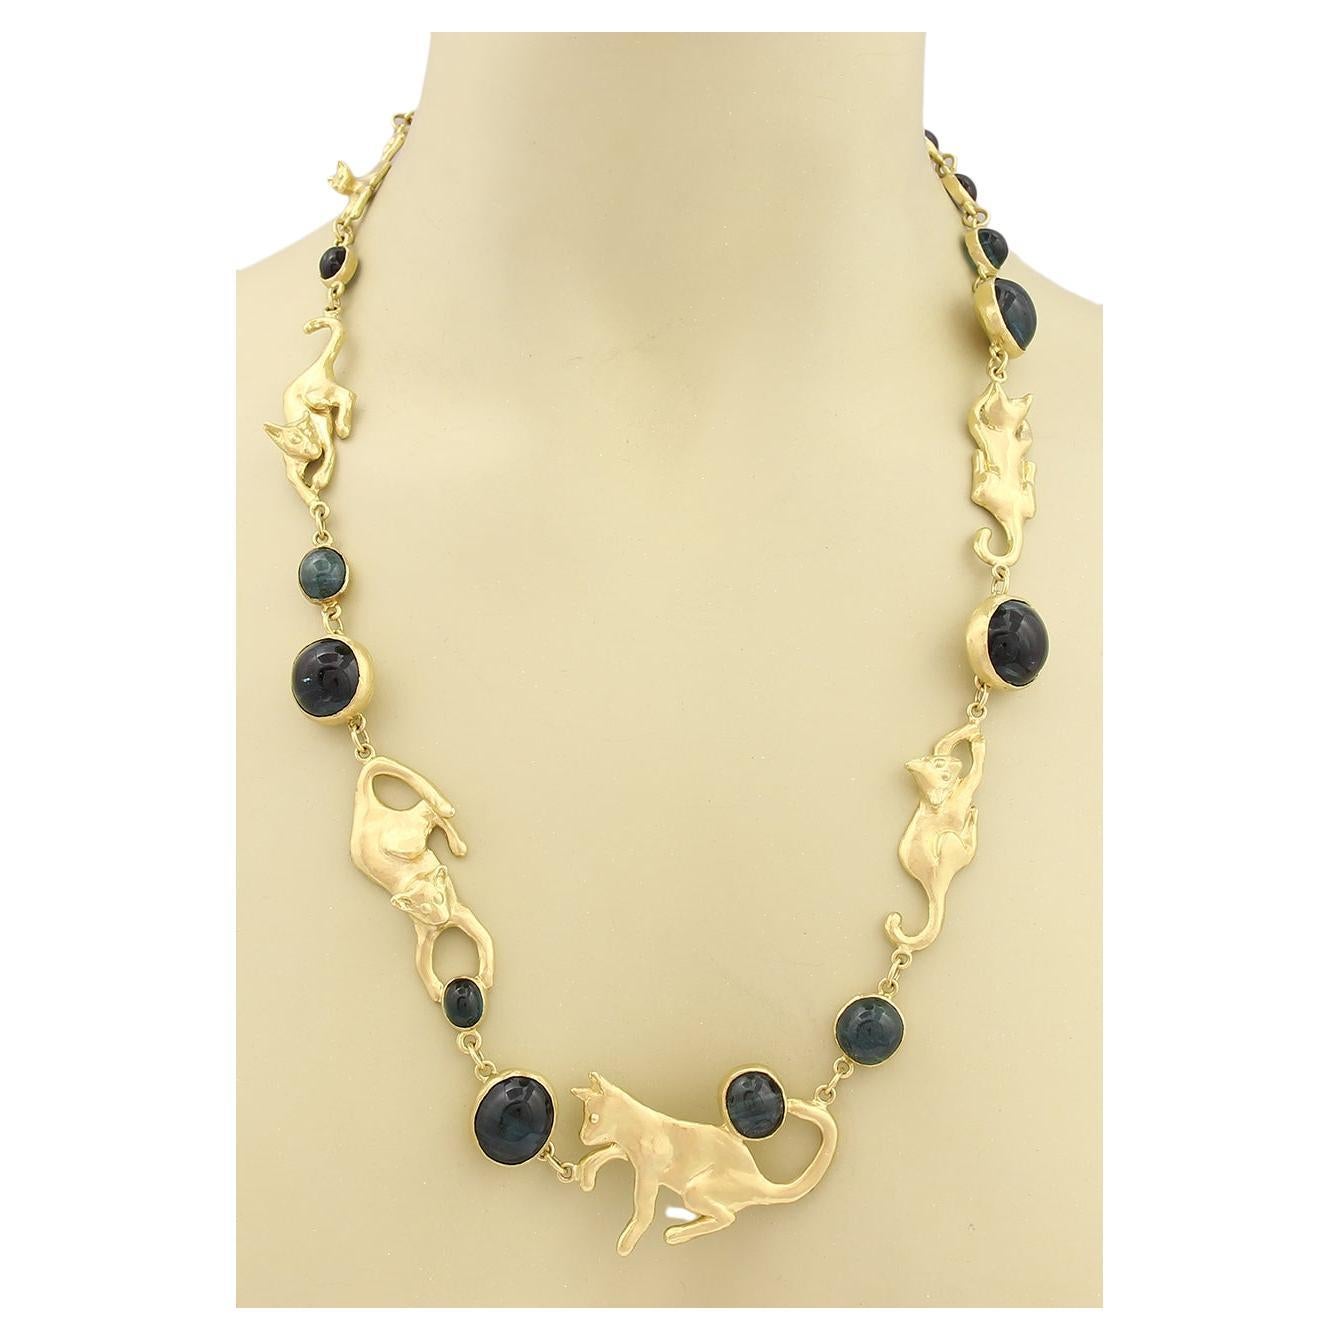 Peter Aylen One of a Kind Indicolite Tourmaline 18k Gold Cats Necklace 155gr. For Sale